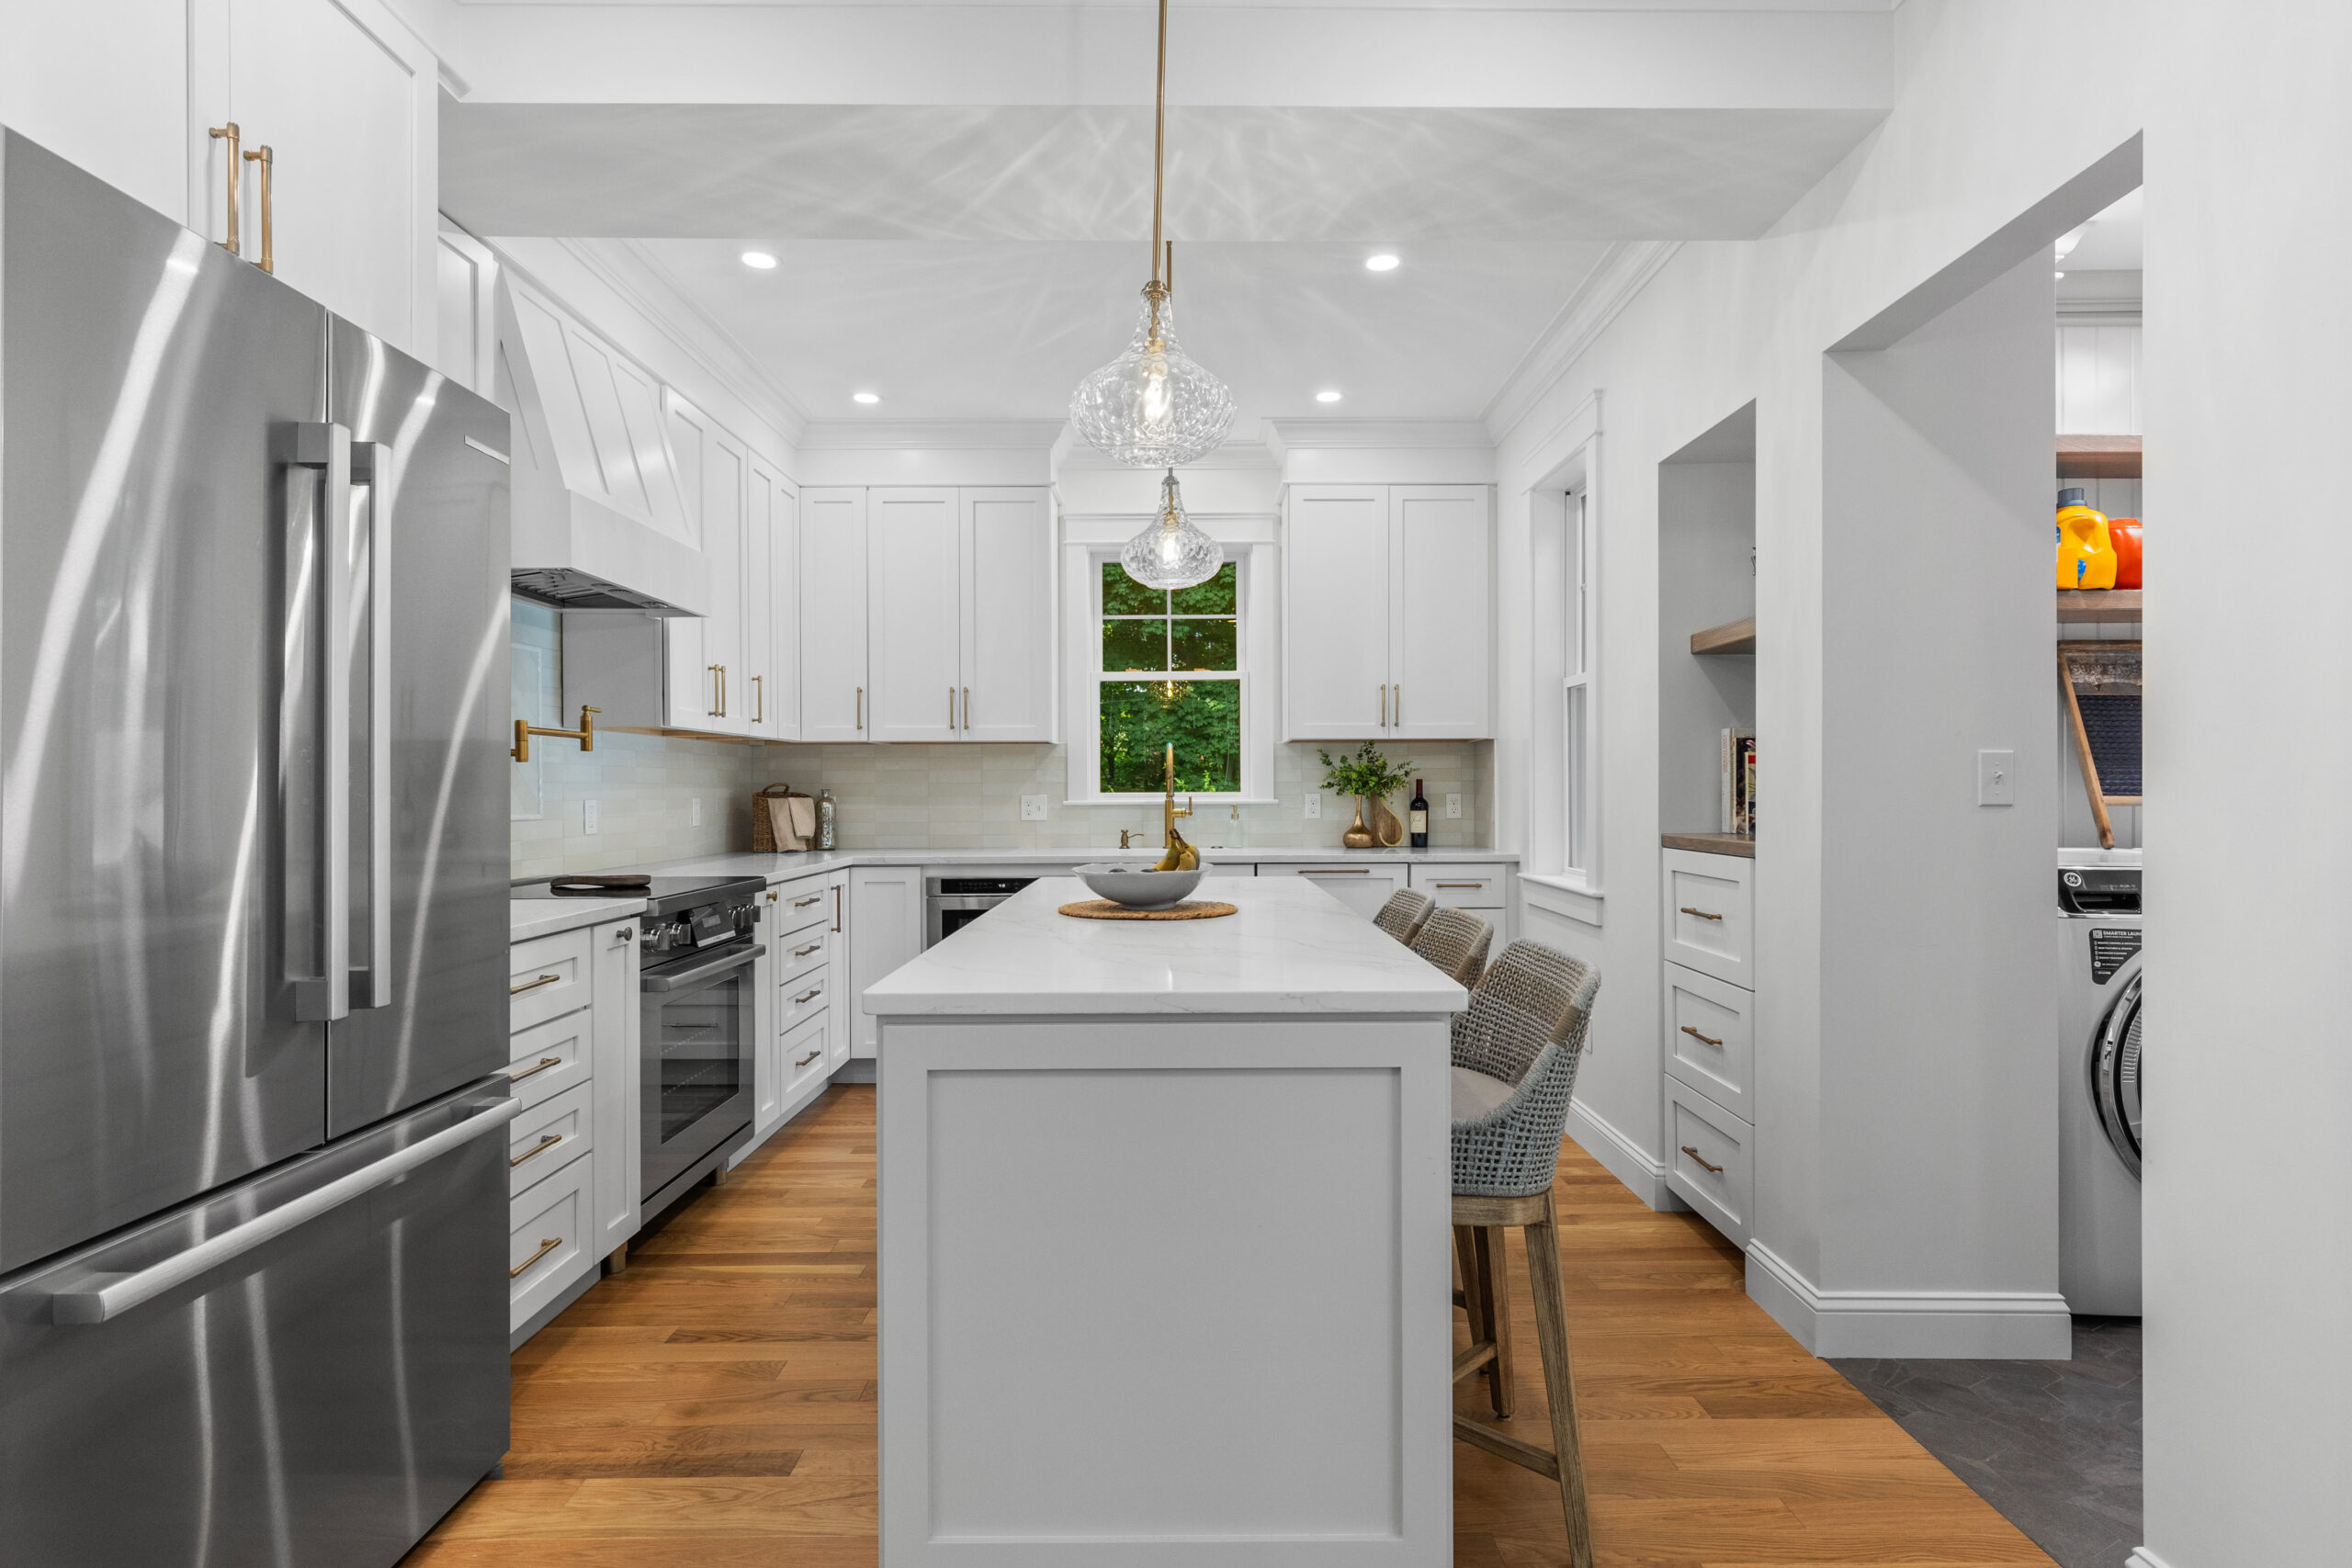 Image of a modern kitchen in a vintage New England home, post-renovation. The kitchen boasts an expansive layout with white cabinetry, marble countertops, and a central island. Elegant pendant lights and under-cabinet lighting highlight the clean lines and contemporary design, while hardwood floors add warmth to the space.